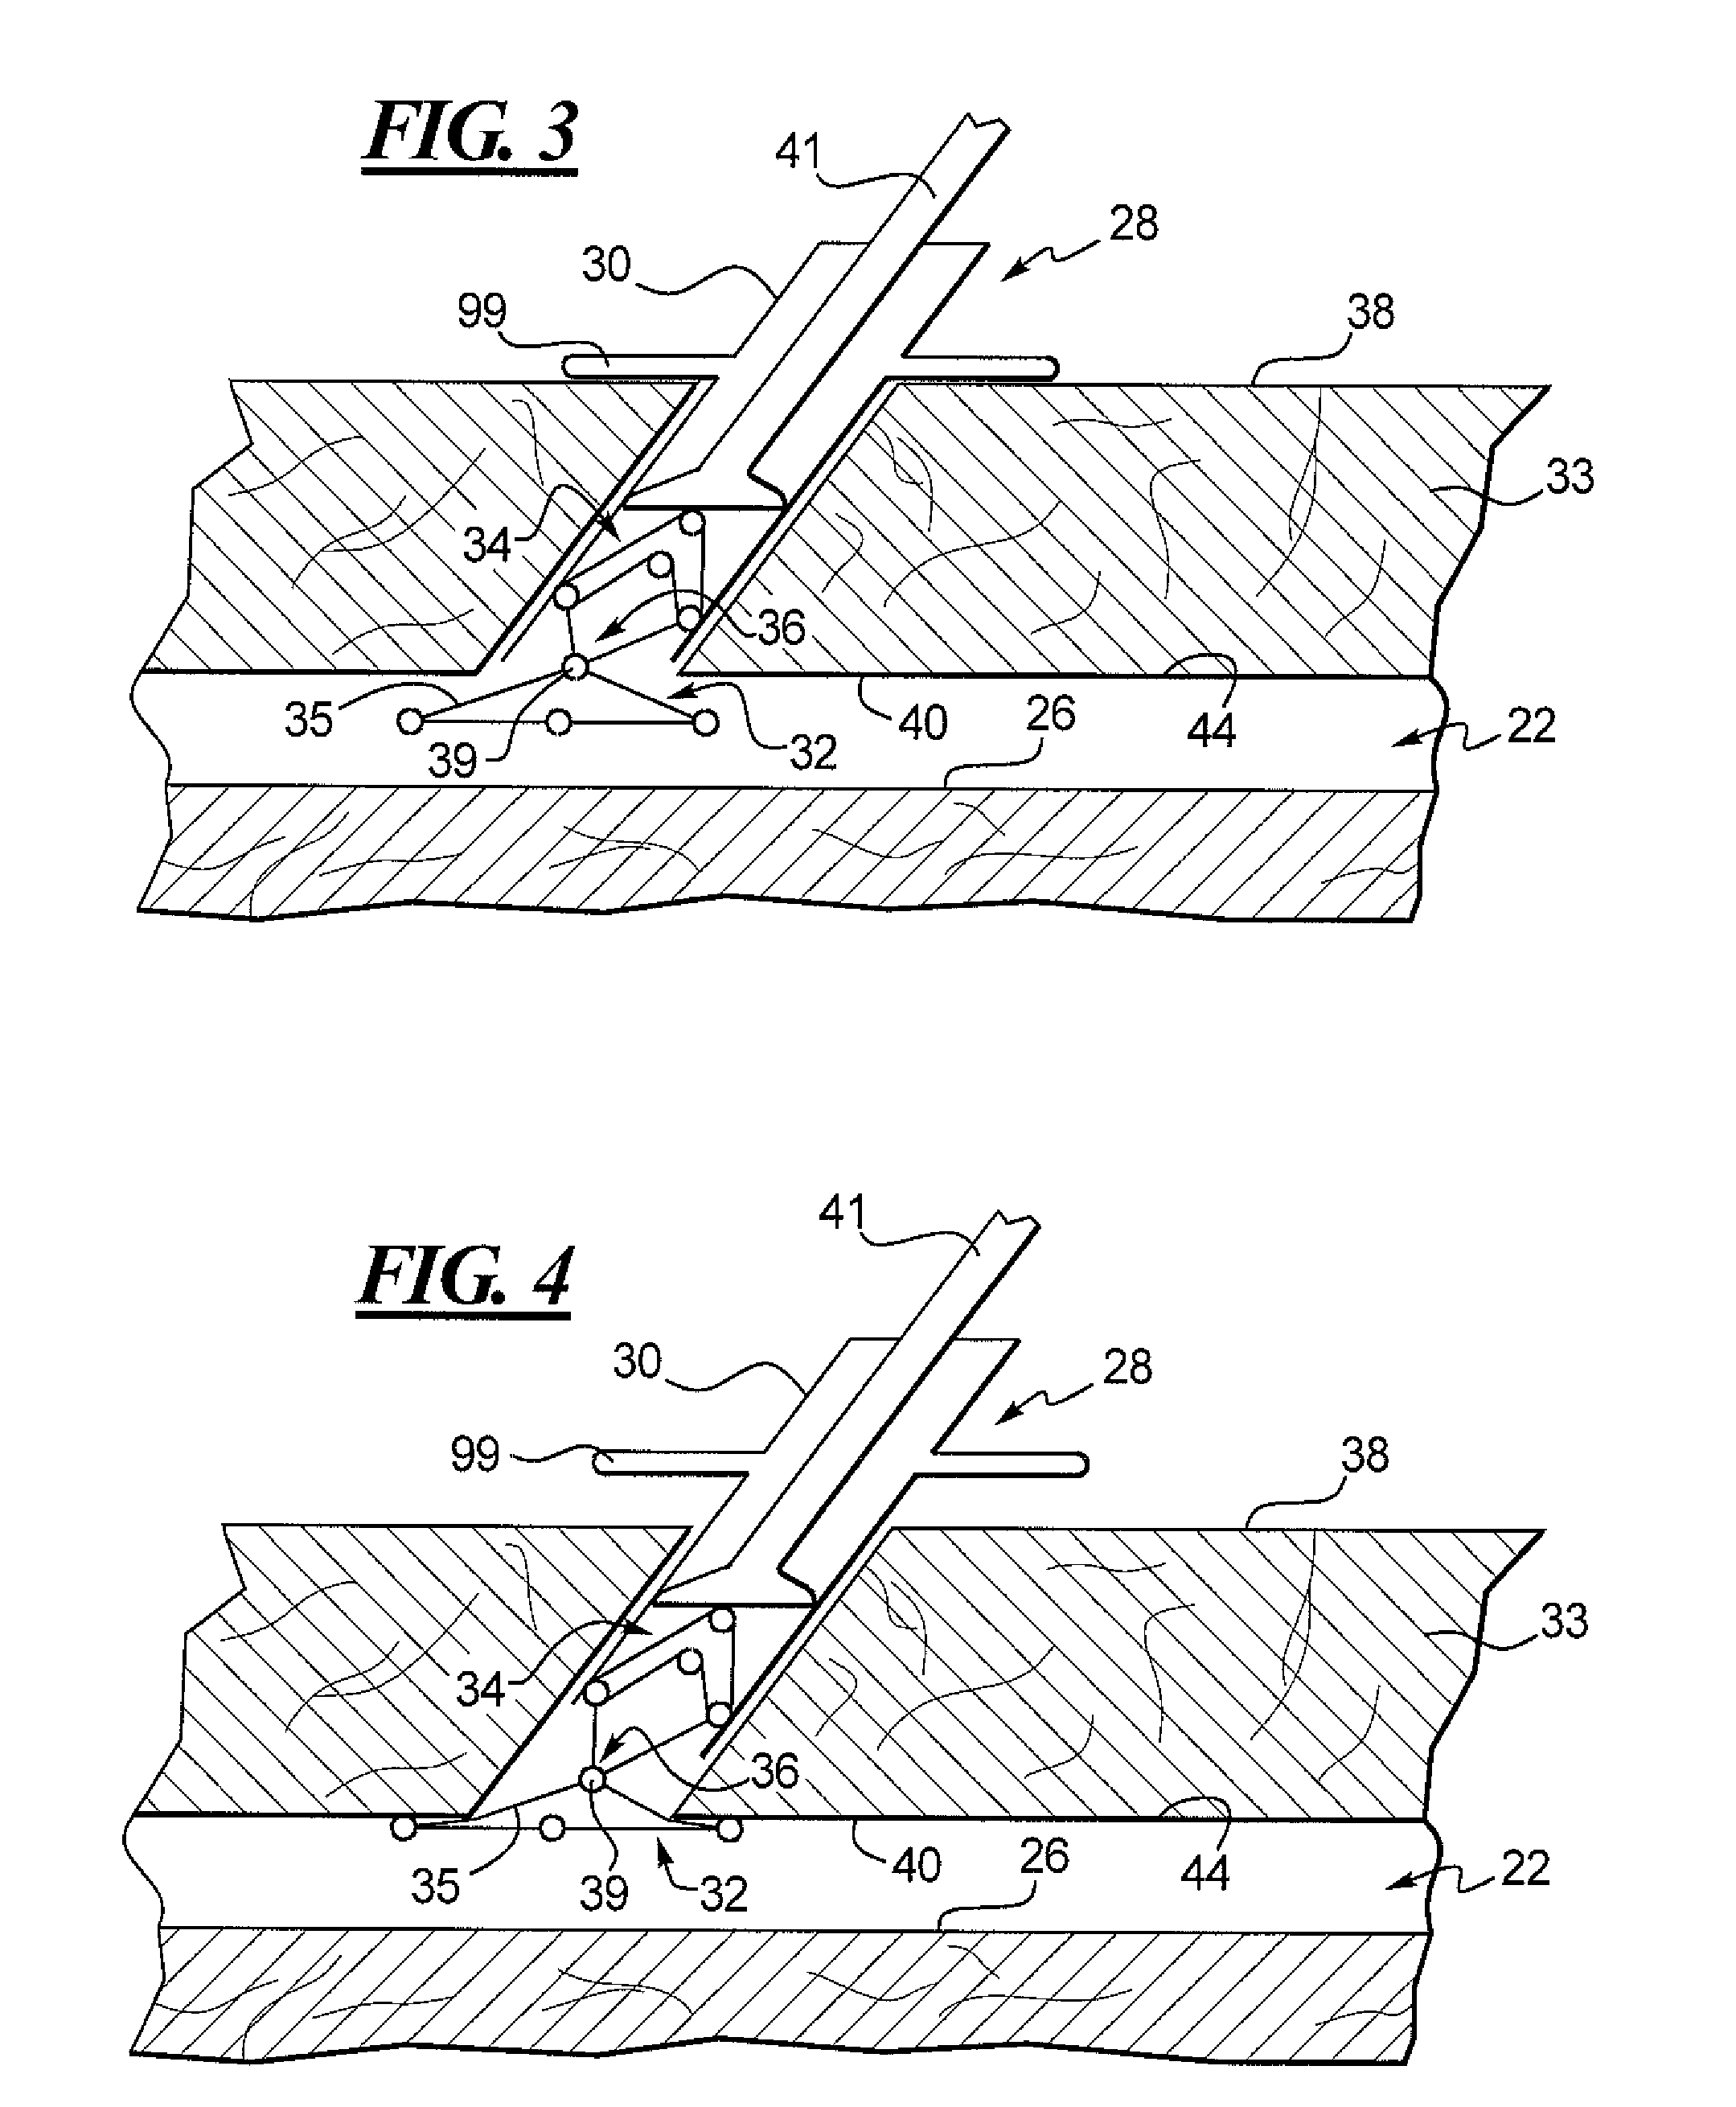 Apparatus and Method for Closing an Opening in a Blood Vessel Using a Permanent Implant